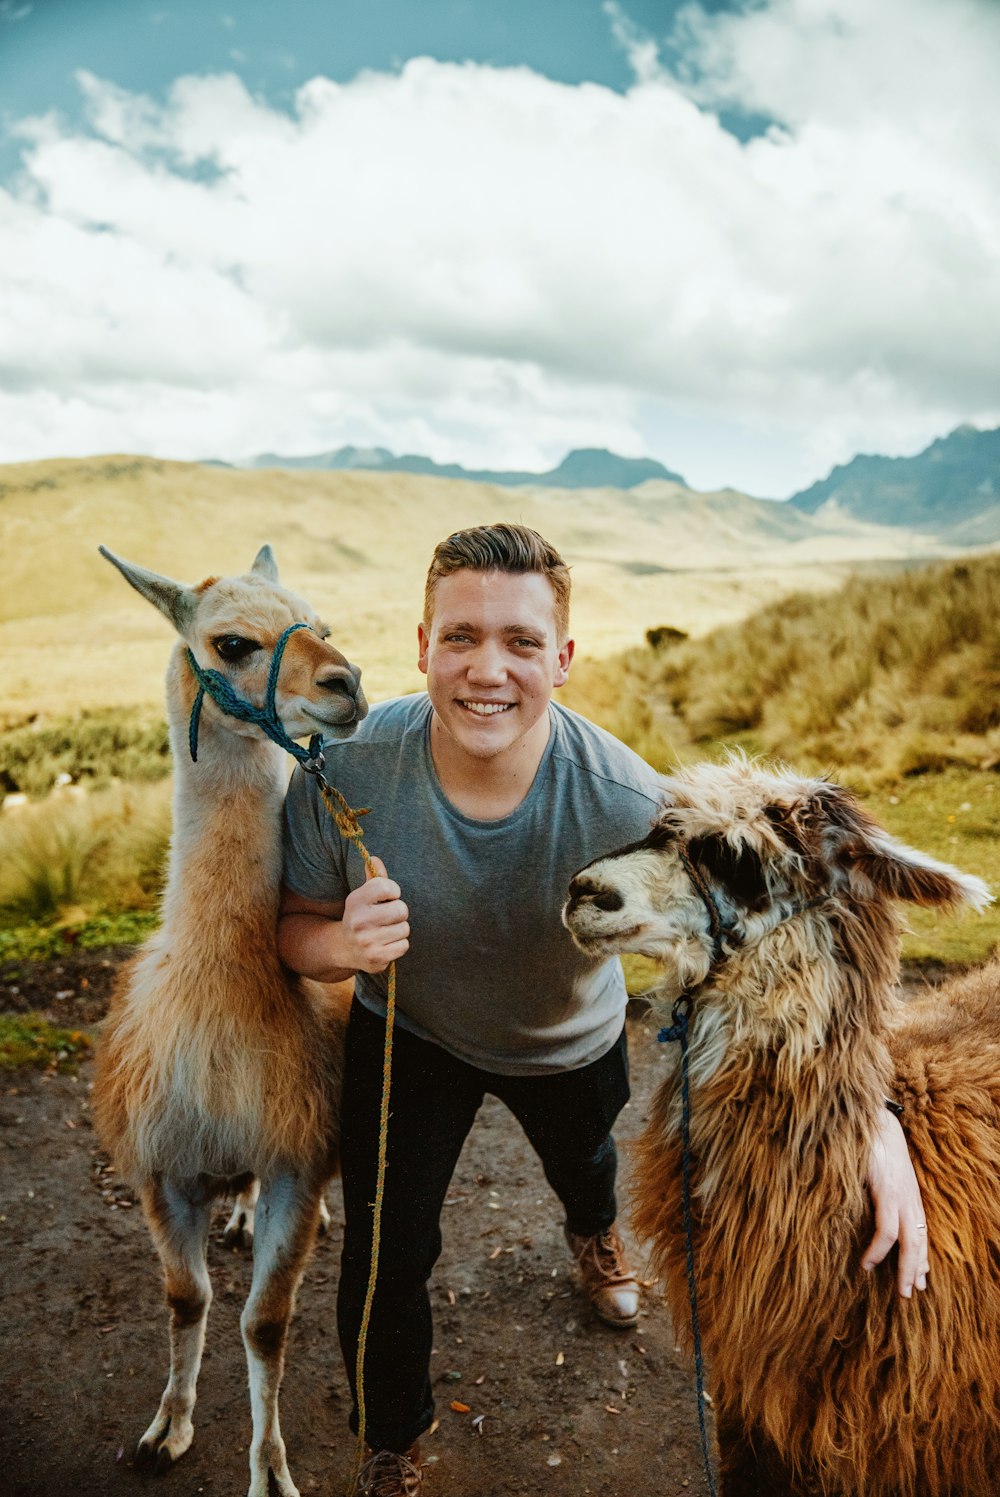 a man standing next to two llamas on a dirt road